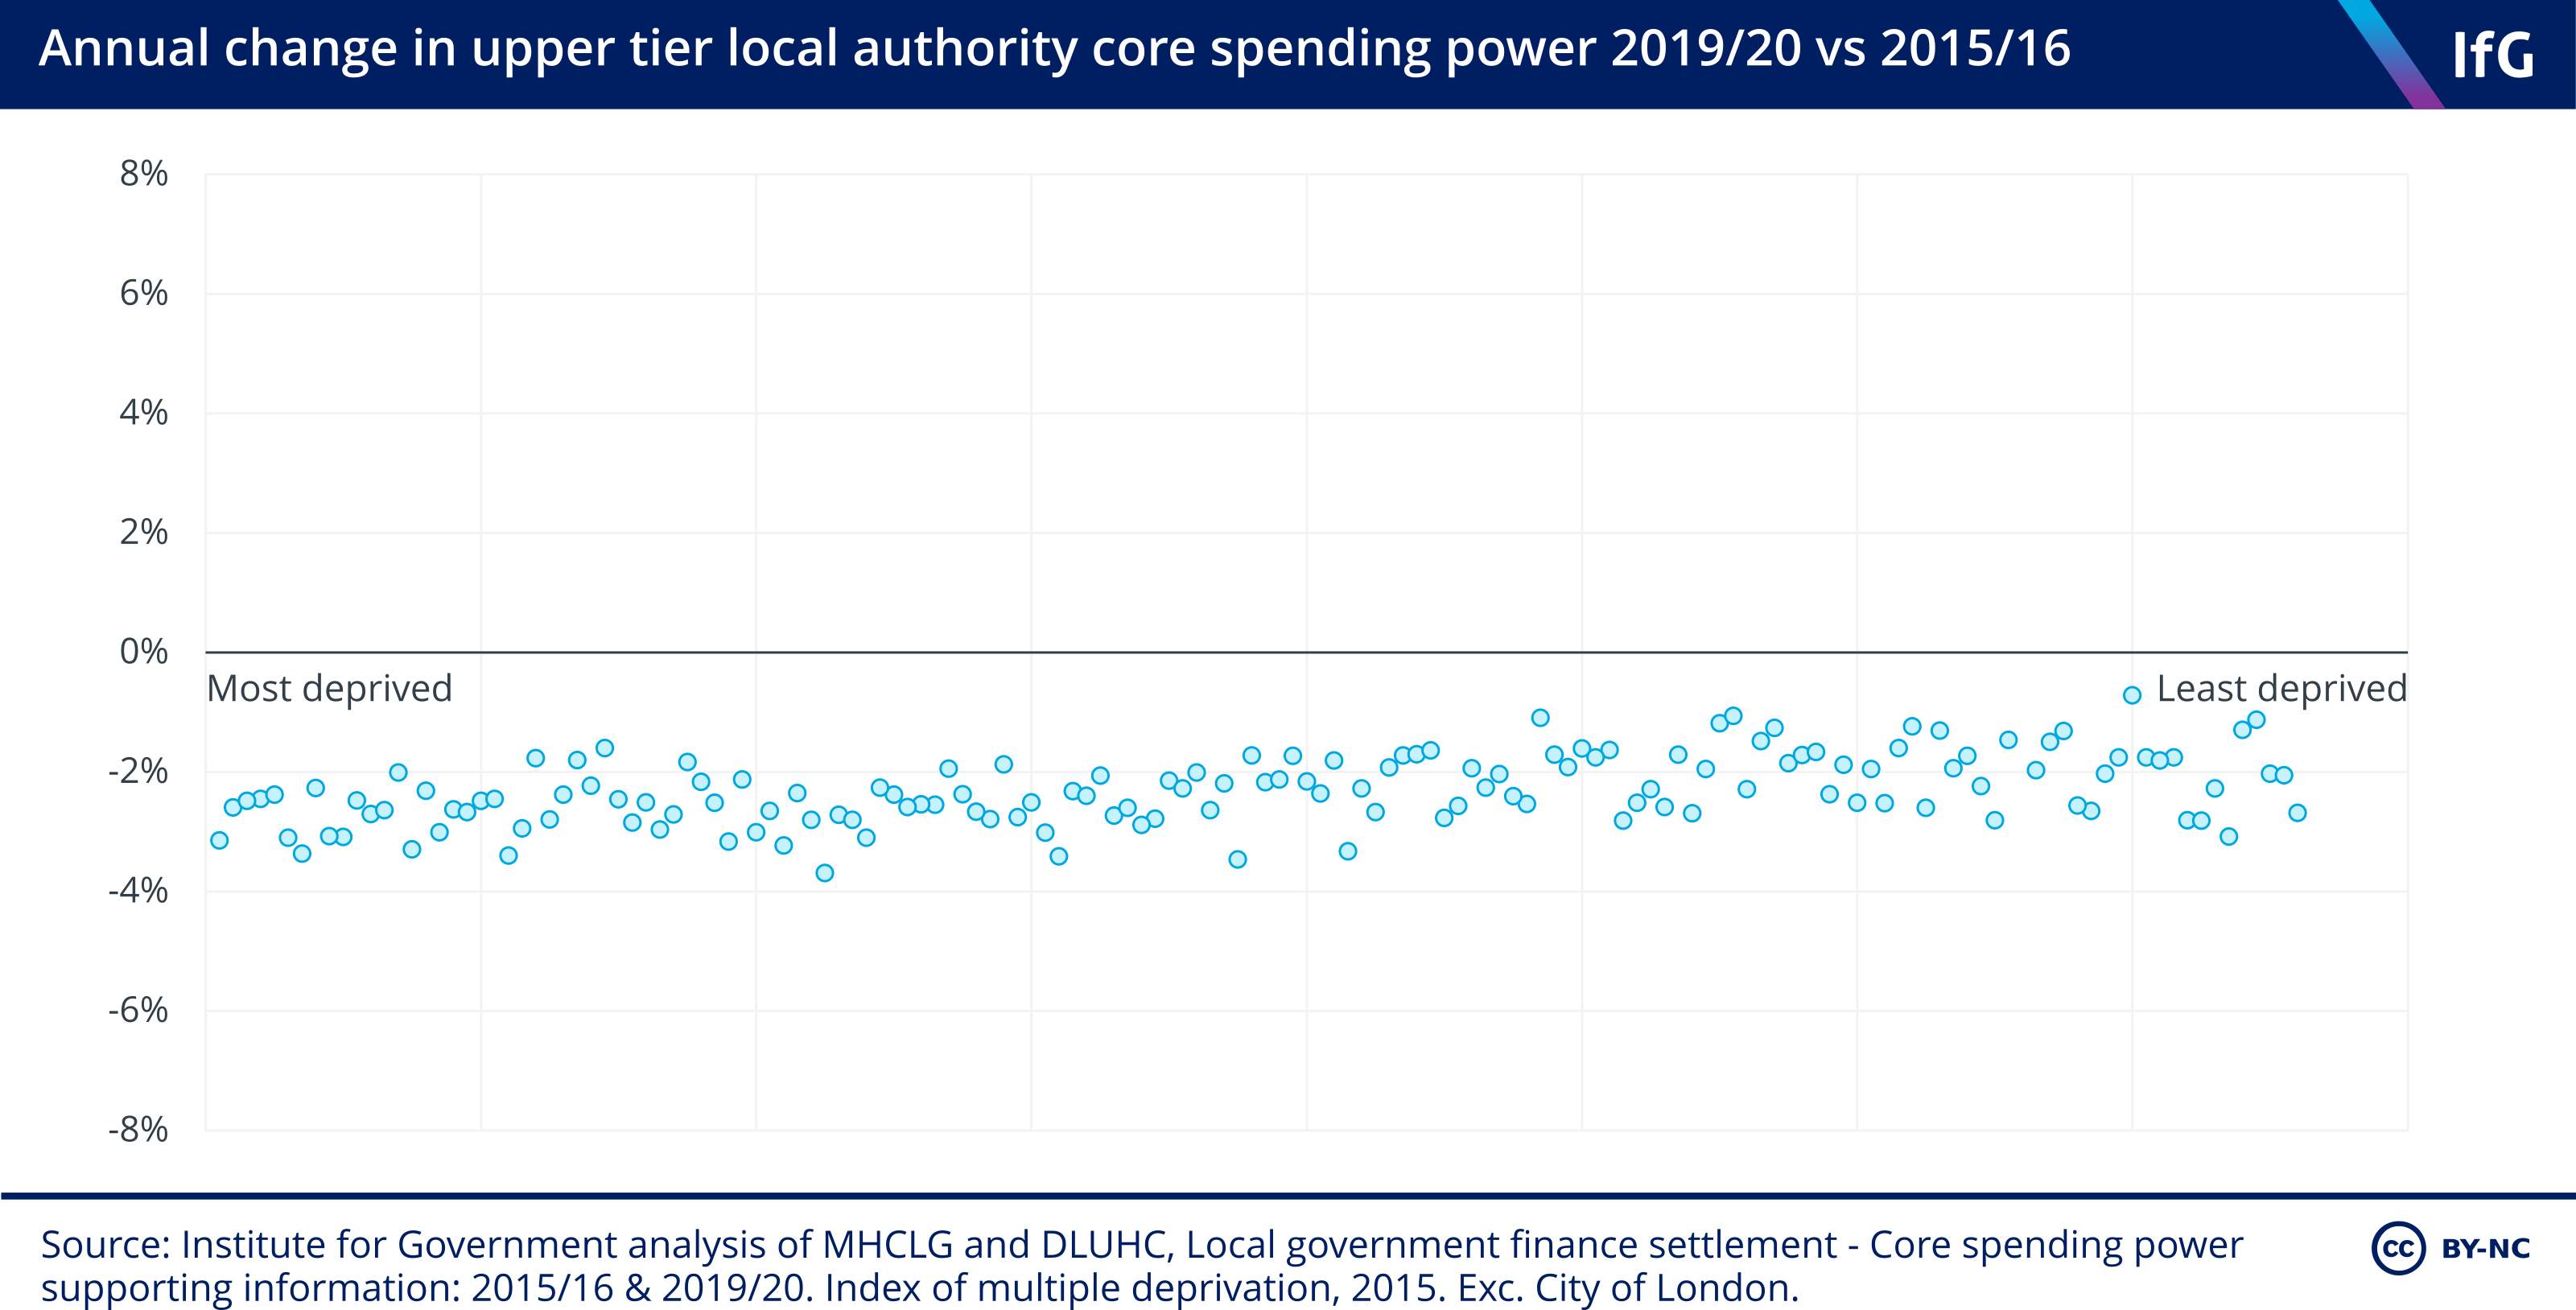 Annual change in upper tier local authority core spending power 2019/20 vs 2015/16